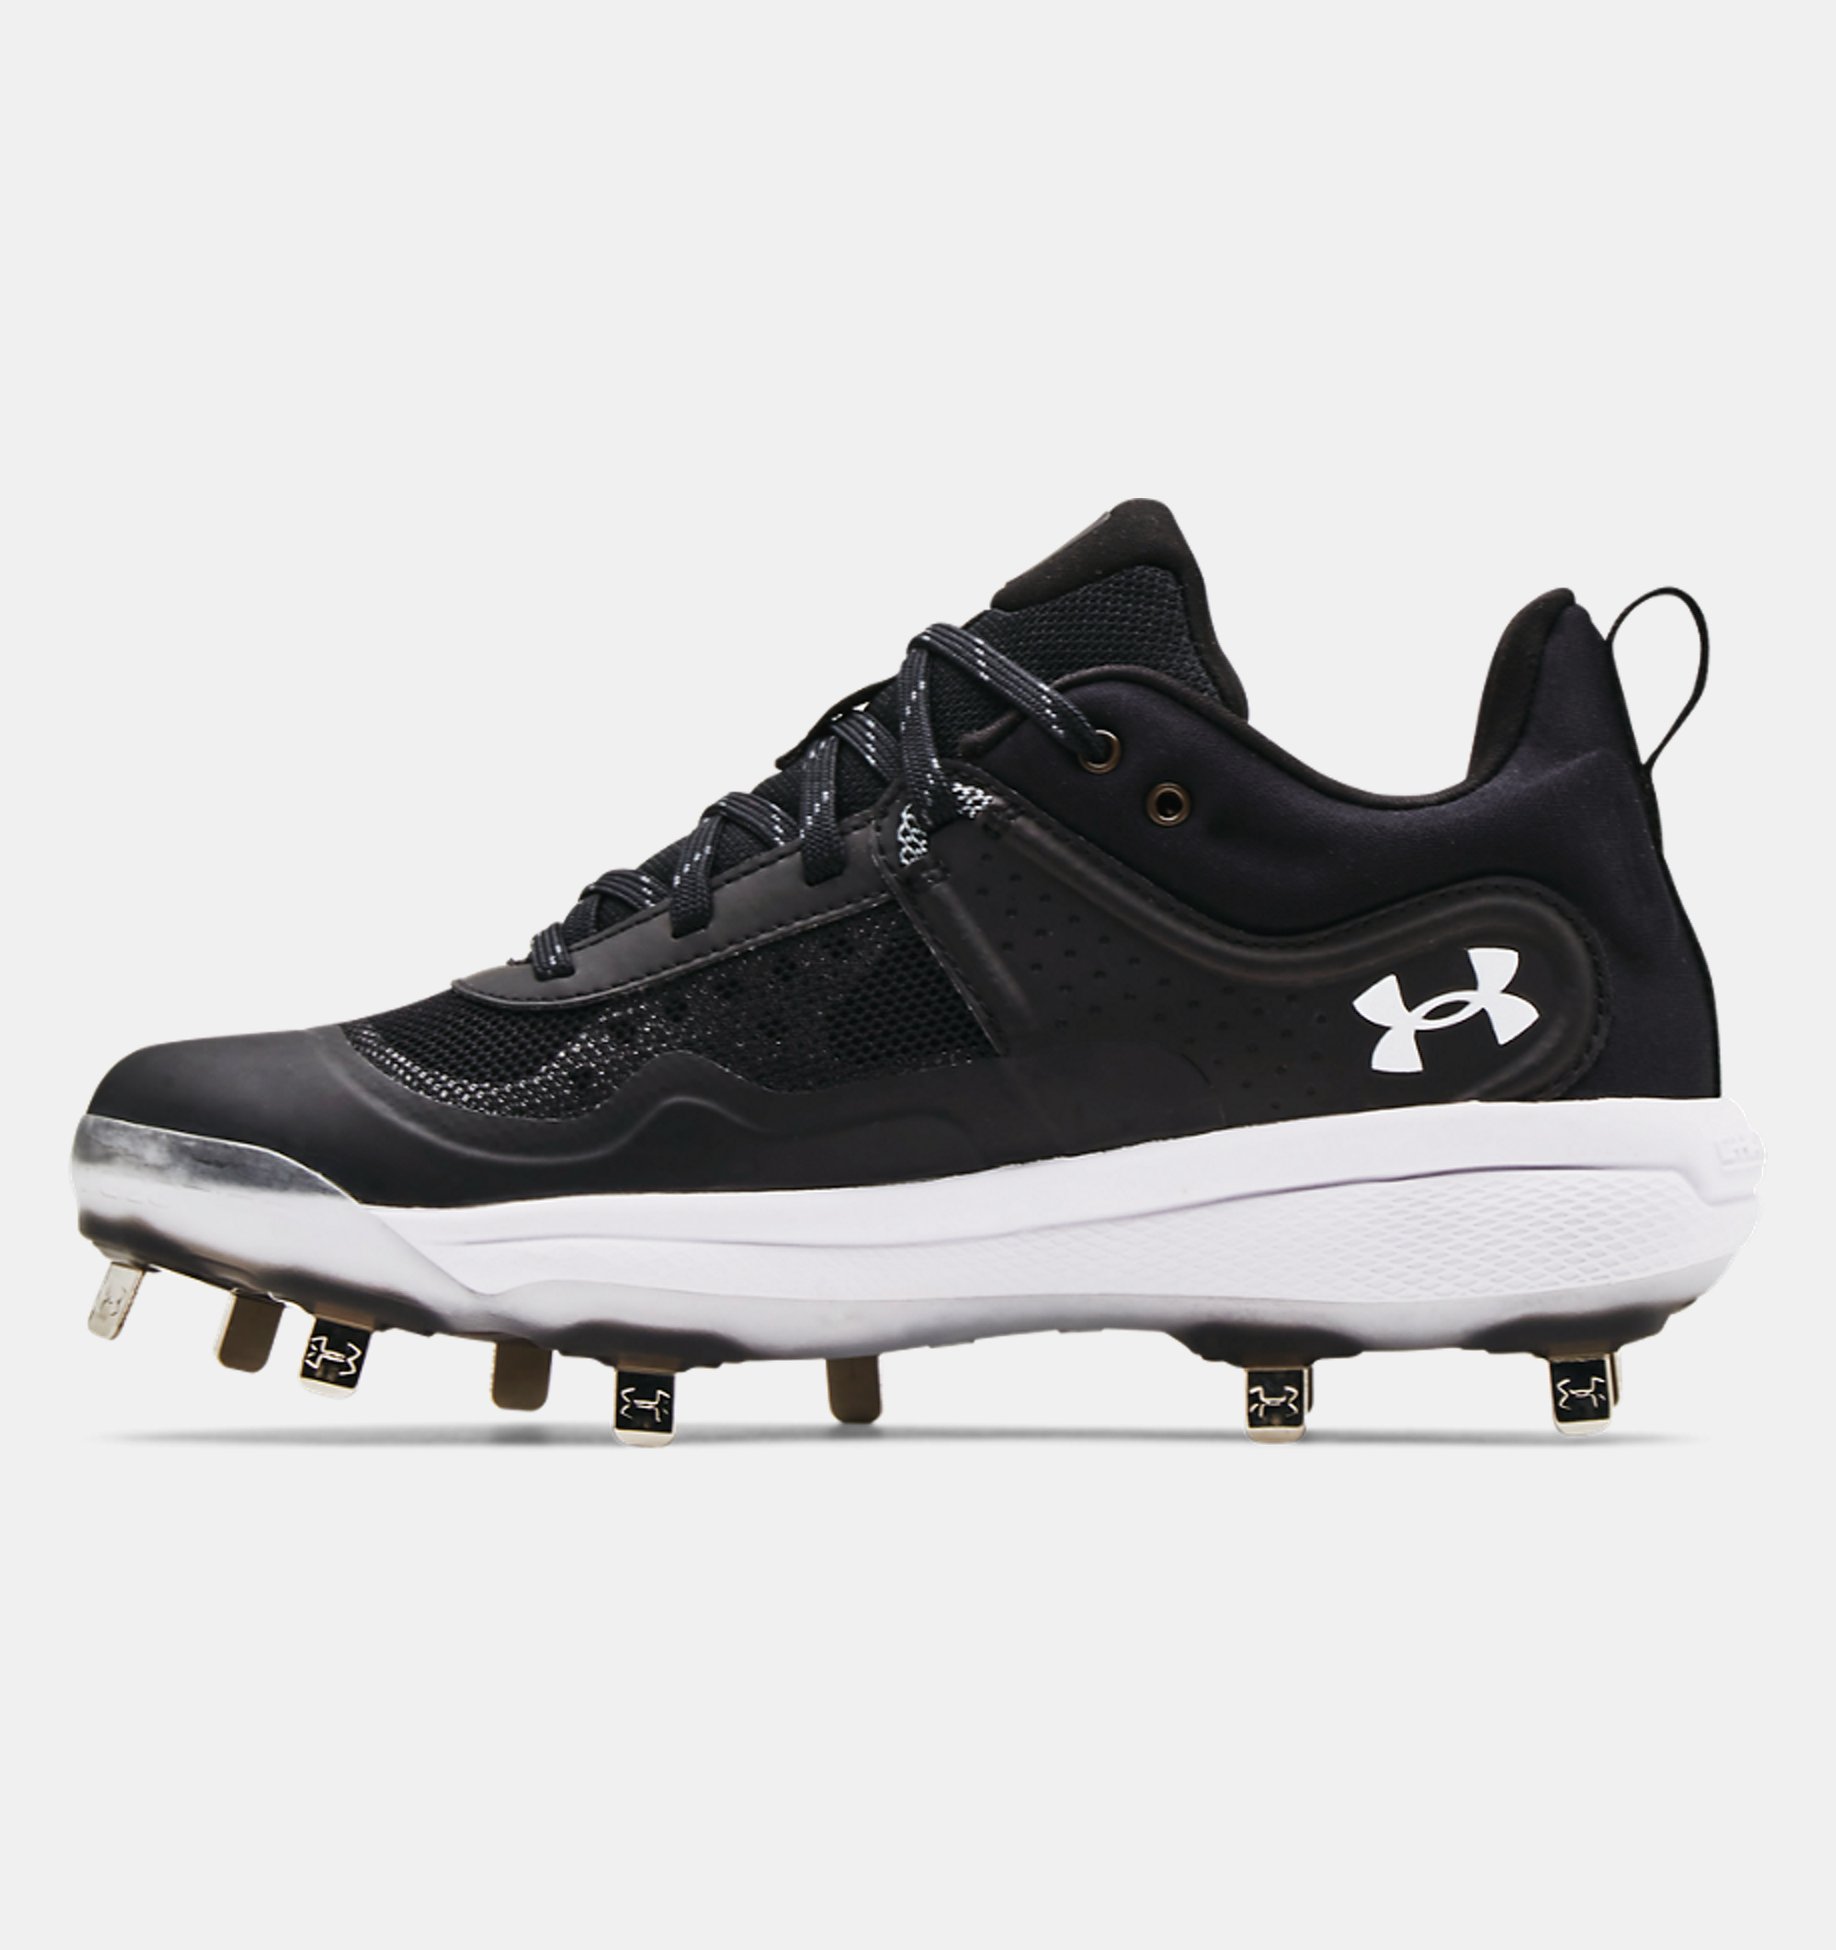 new UNDER ARMOUR women's GLYDE RM Softball Cleats sz 7.5 8 8.5 black pink shoes 